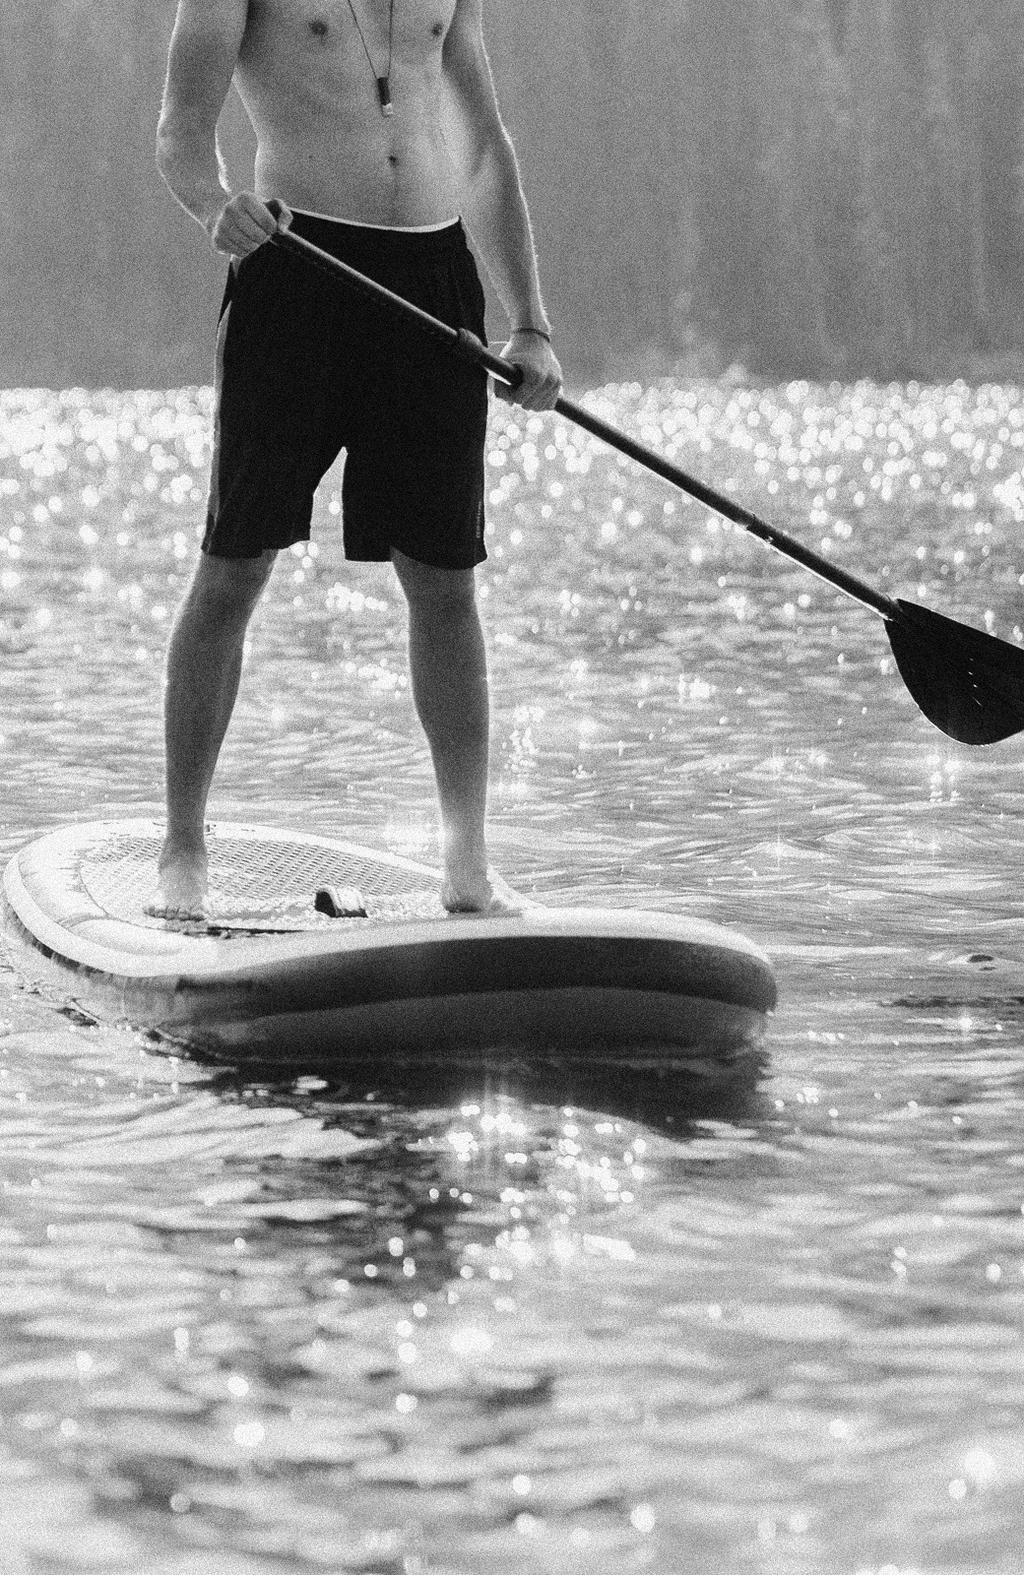 SAFETY WARNING! WE CARE ABOUT YOU A TON. PLEASE PADDLE SAFELY. FAILURE TO FOLLOW THE WARNINGS A PRECAUTIONS BELOW MAY LEAD TO SERIOUS INJURY OR DEATH!